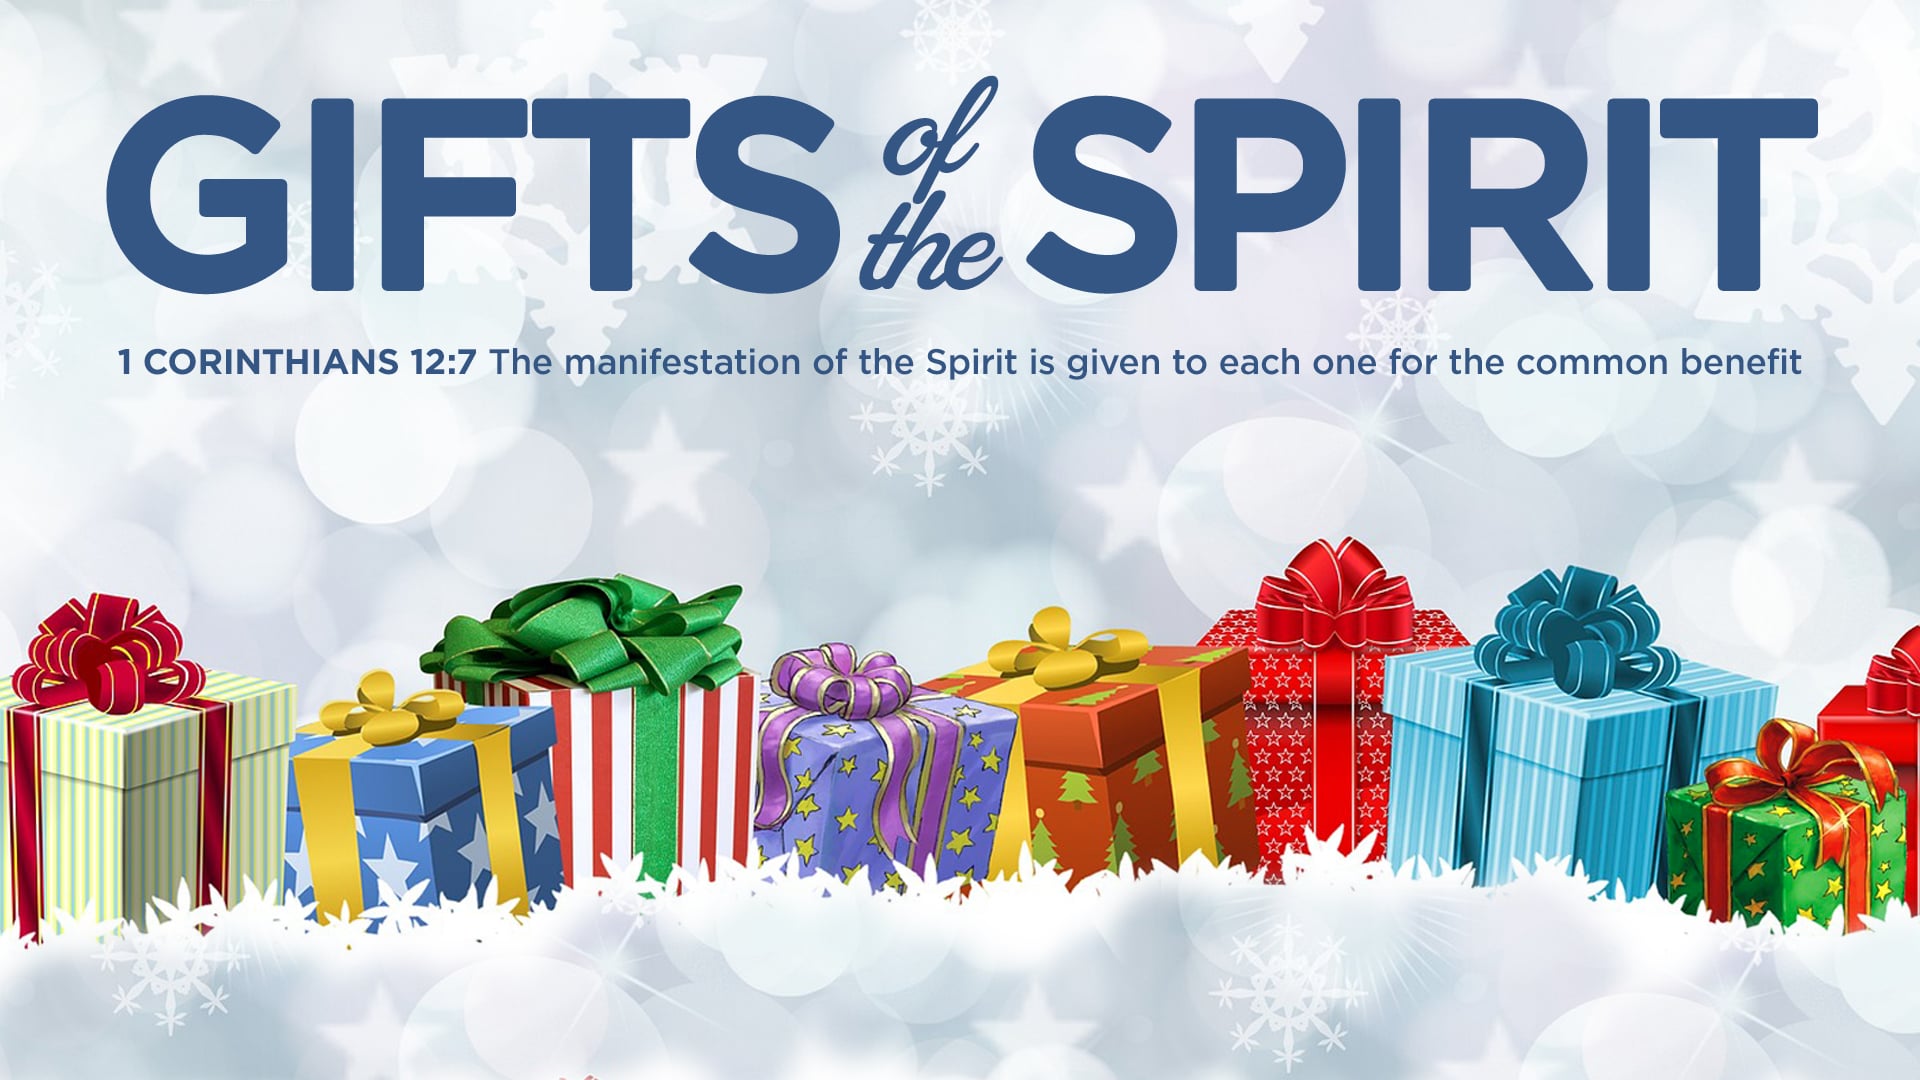 Gifts of the Spirit 3: Messages